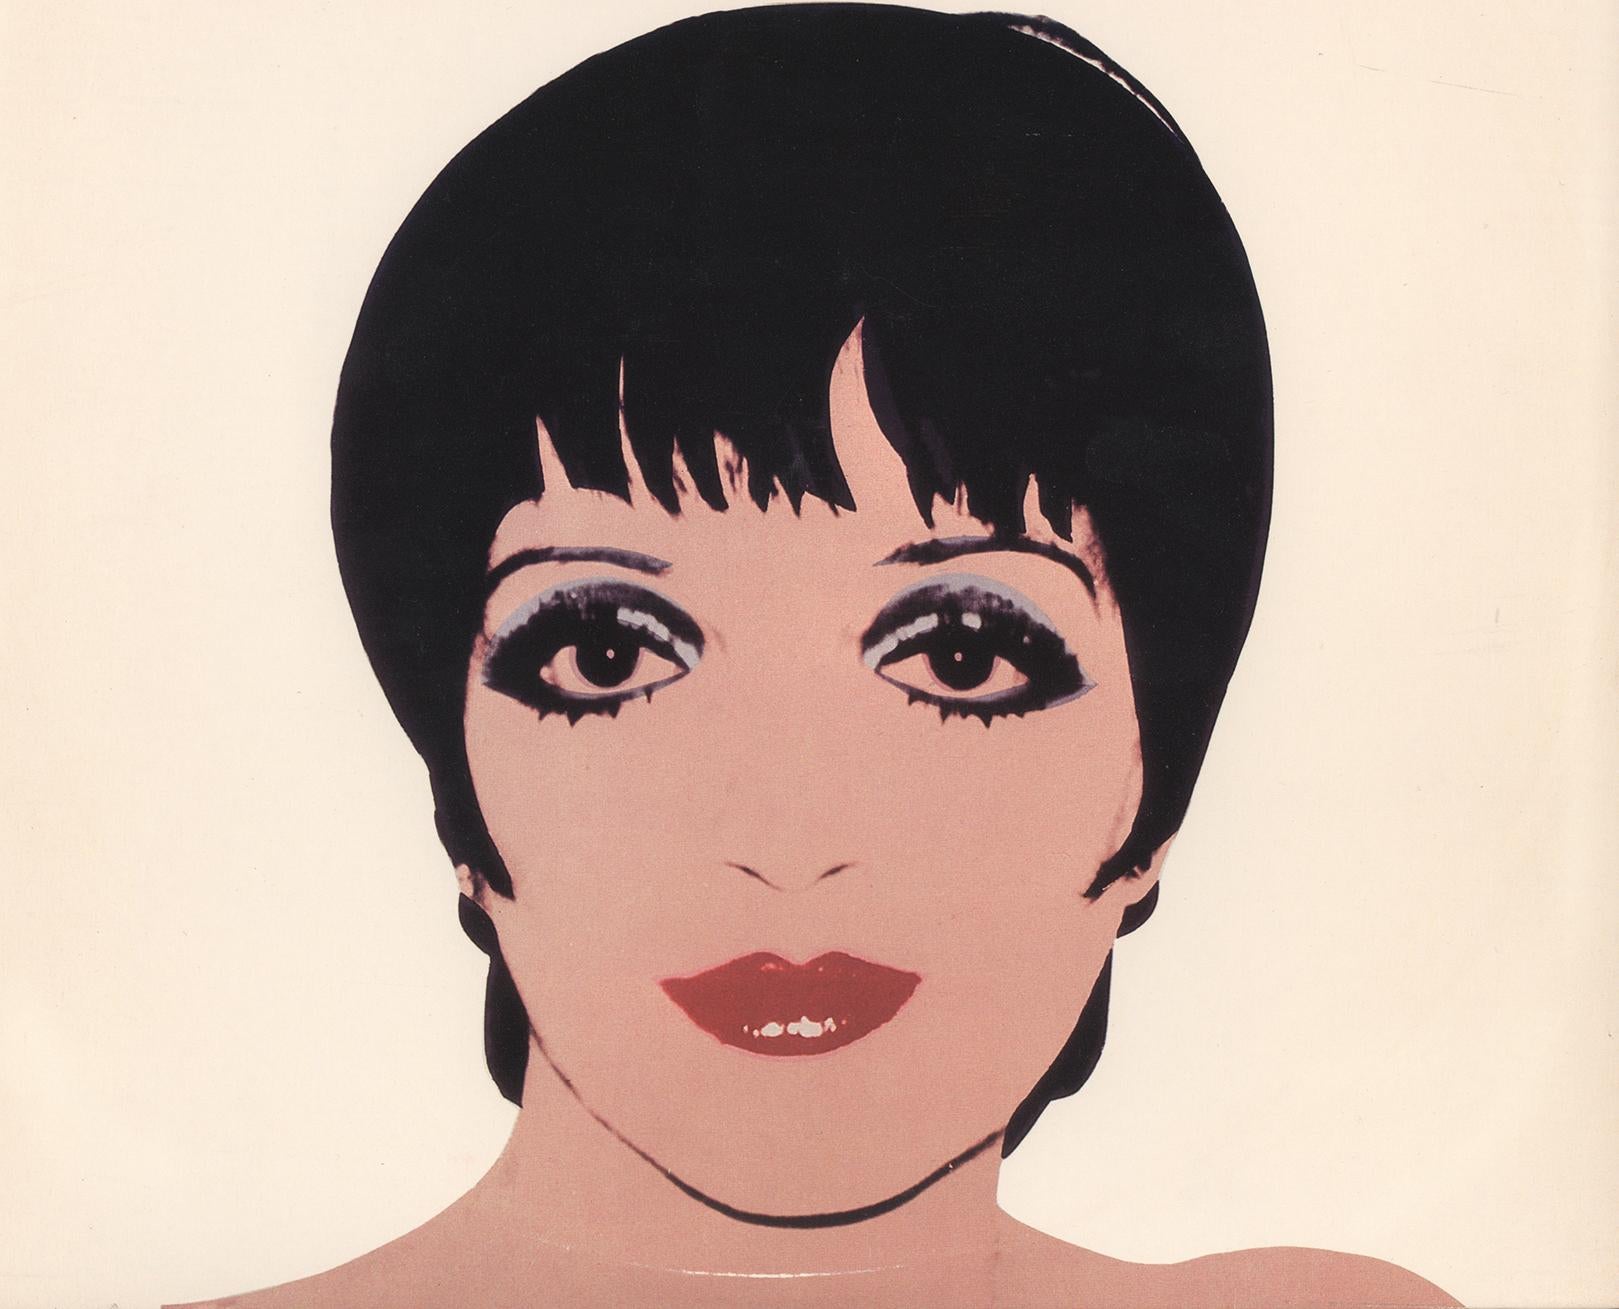 Liza Minnelli
Live at Carnegie Hall
Vinyl, LP
Recorded in September 1979
Released in August 1981
Altel Sound Systems
Cover art credit: Andy Warhol

Rare Sought After Andy Warhol Liza Minnelli Vinyl Record Art:
Offset illustrated by Andy Warhol in